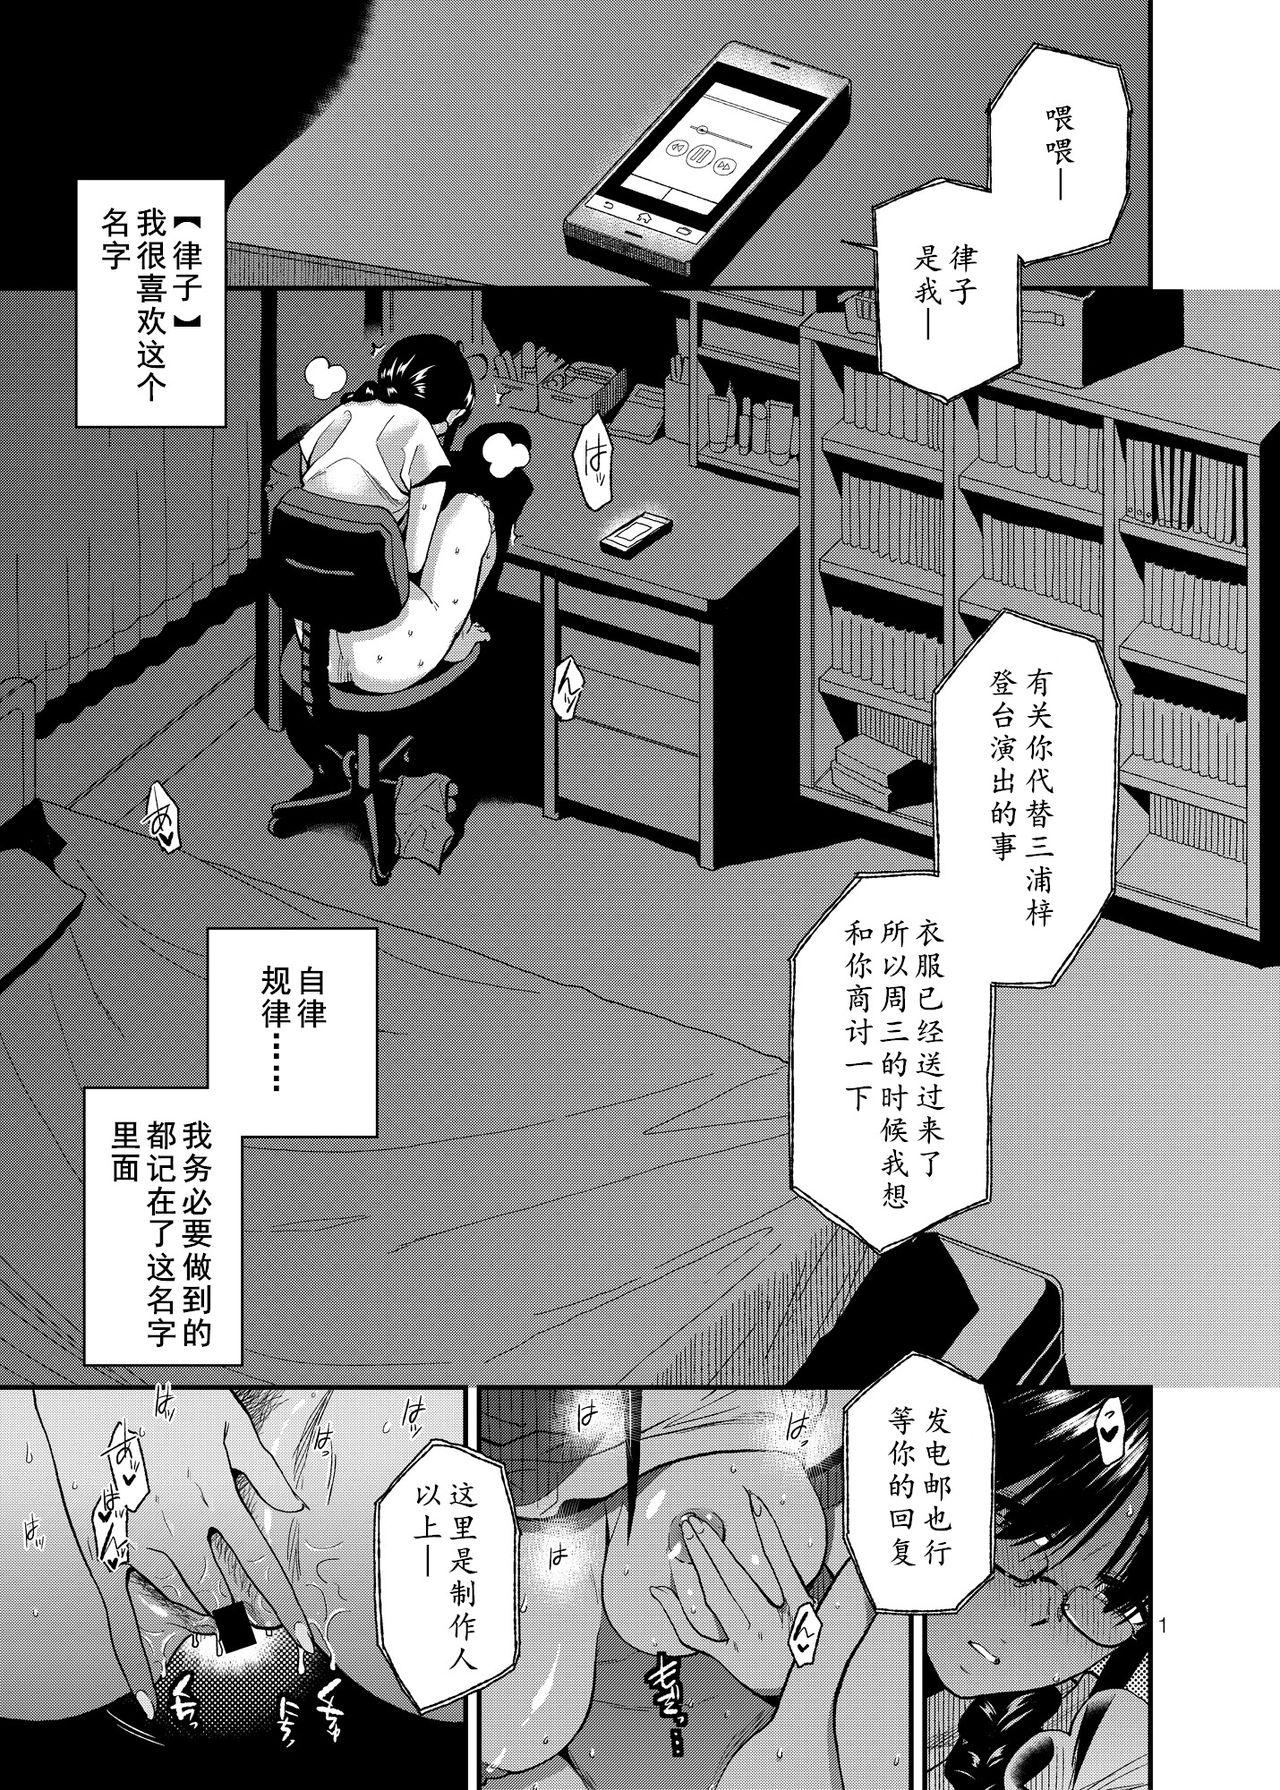 The UNCONTROLLABLE | 全面失控 - The idolmaster Safada - Page 3